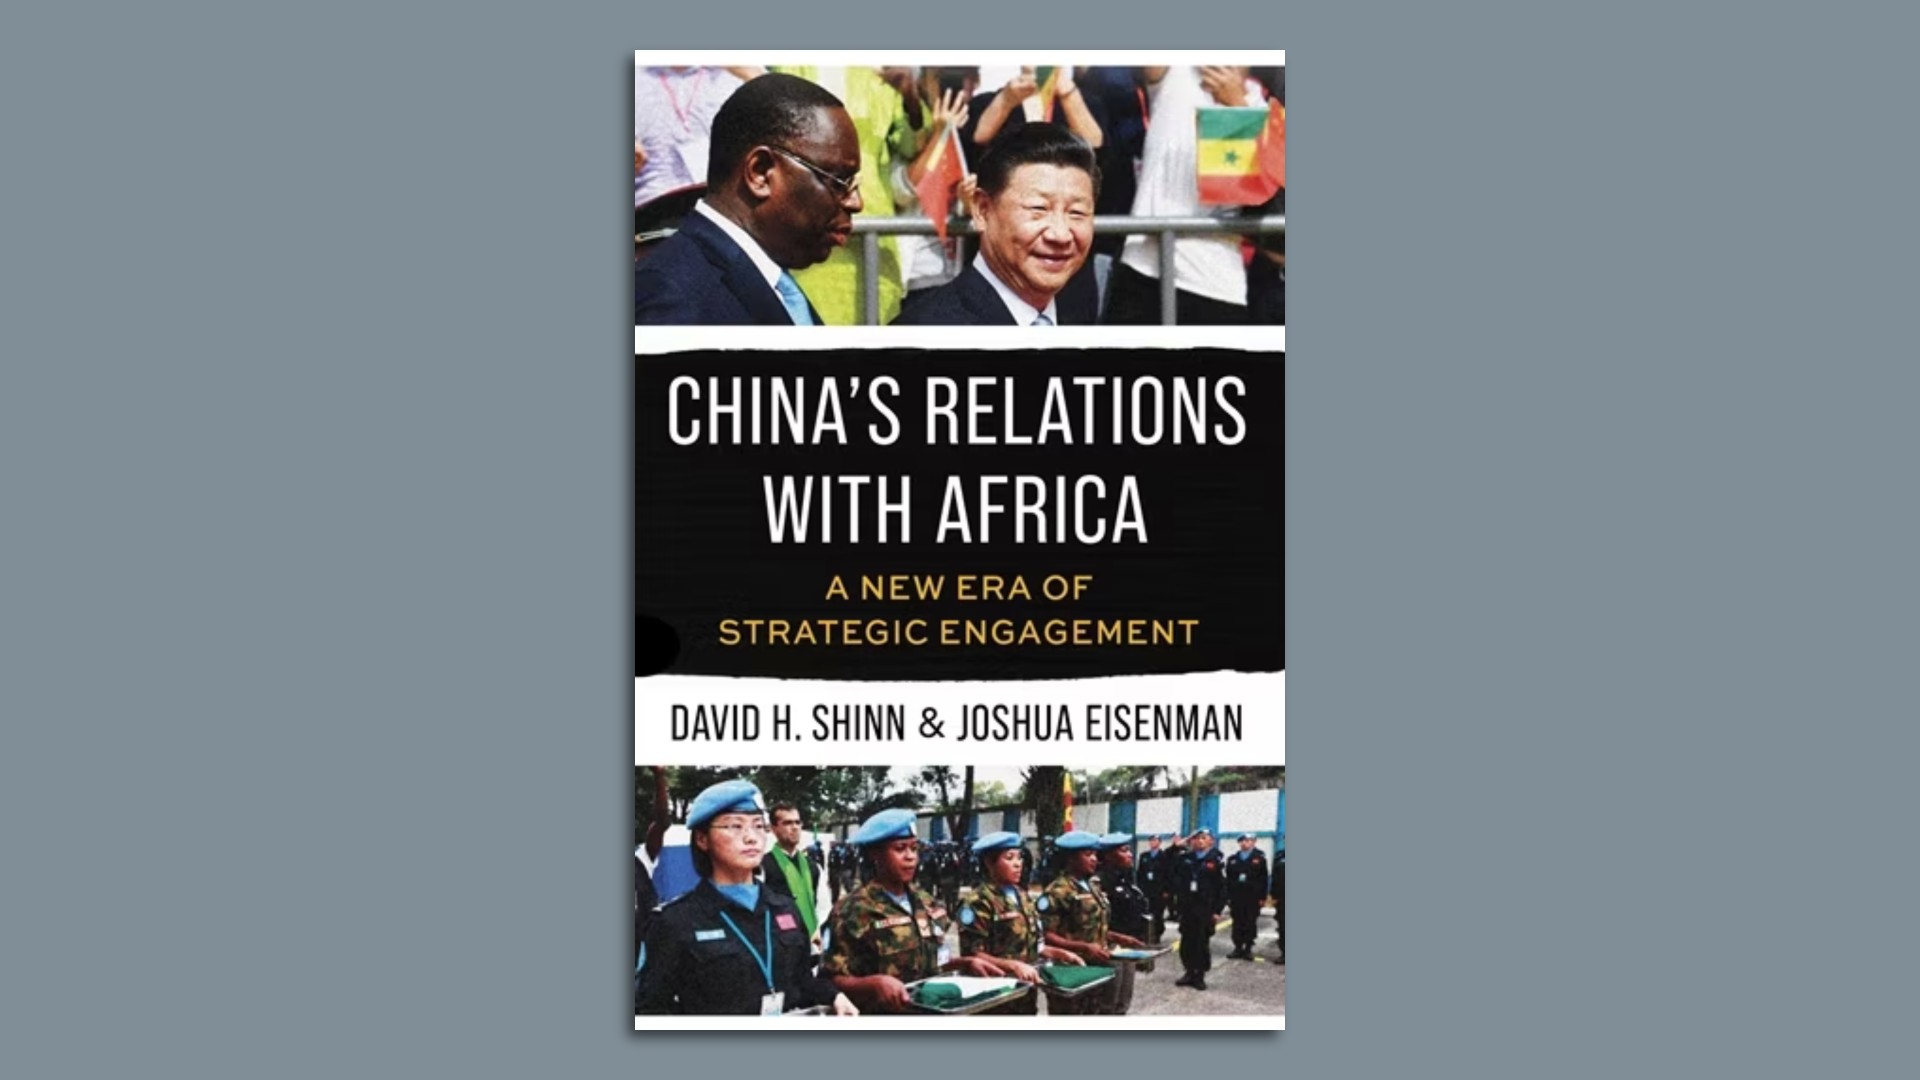 Book cover image of  "China's Relations with Africa: A New Era of Strategic Engagement" from Columbia University Press